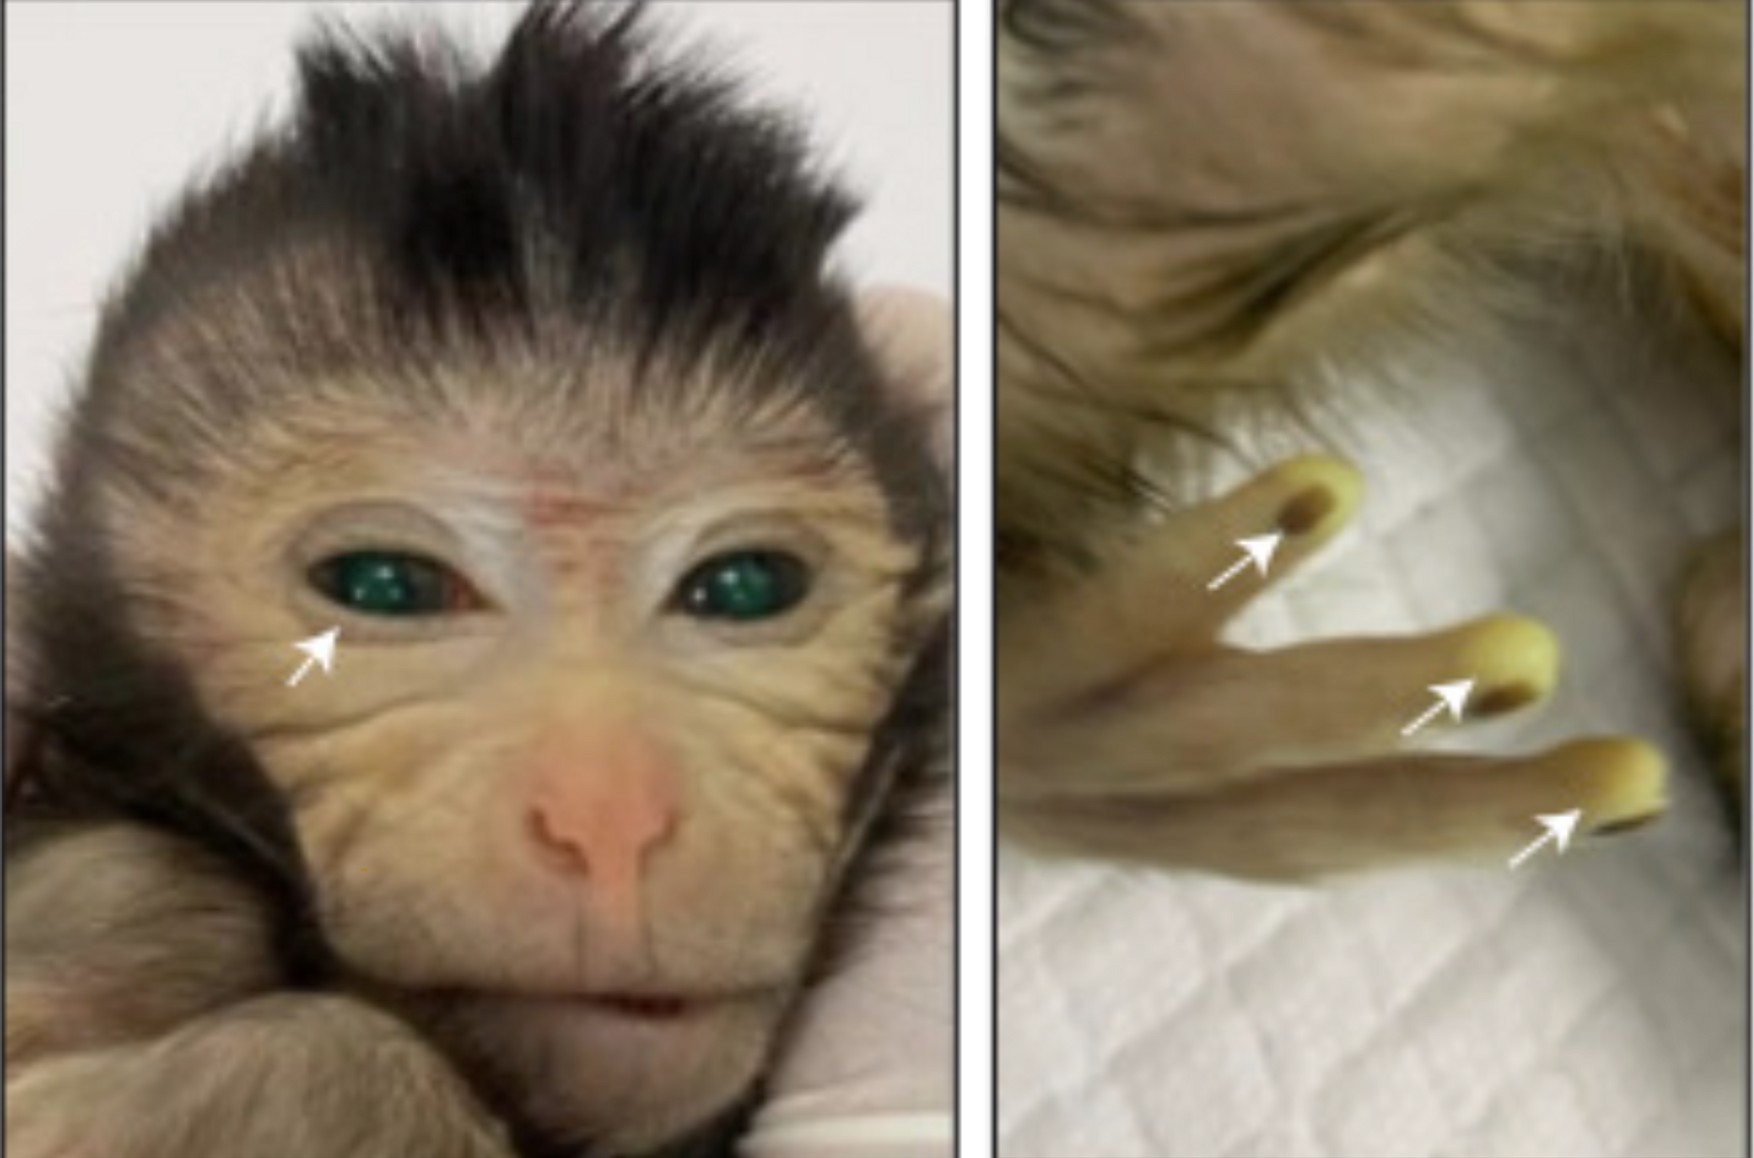 In China a chimera monkey was created from two sets In China, a chimera monkey was created from two sets of DNA. Scientists hope this breakthrough will help treat ALS in humans